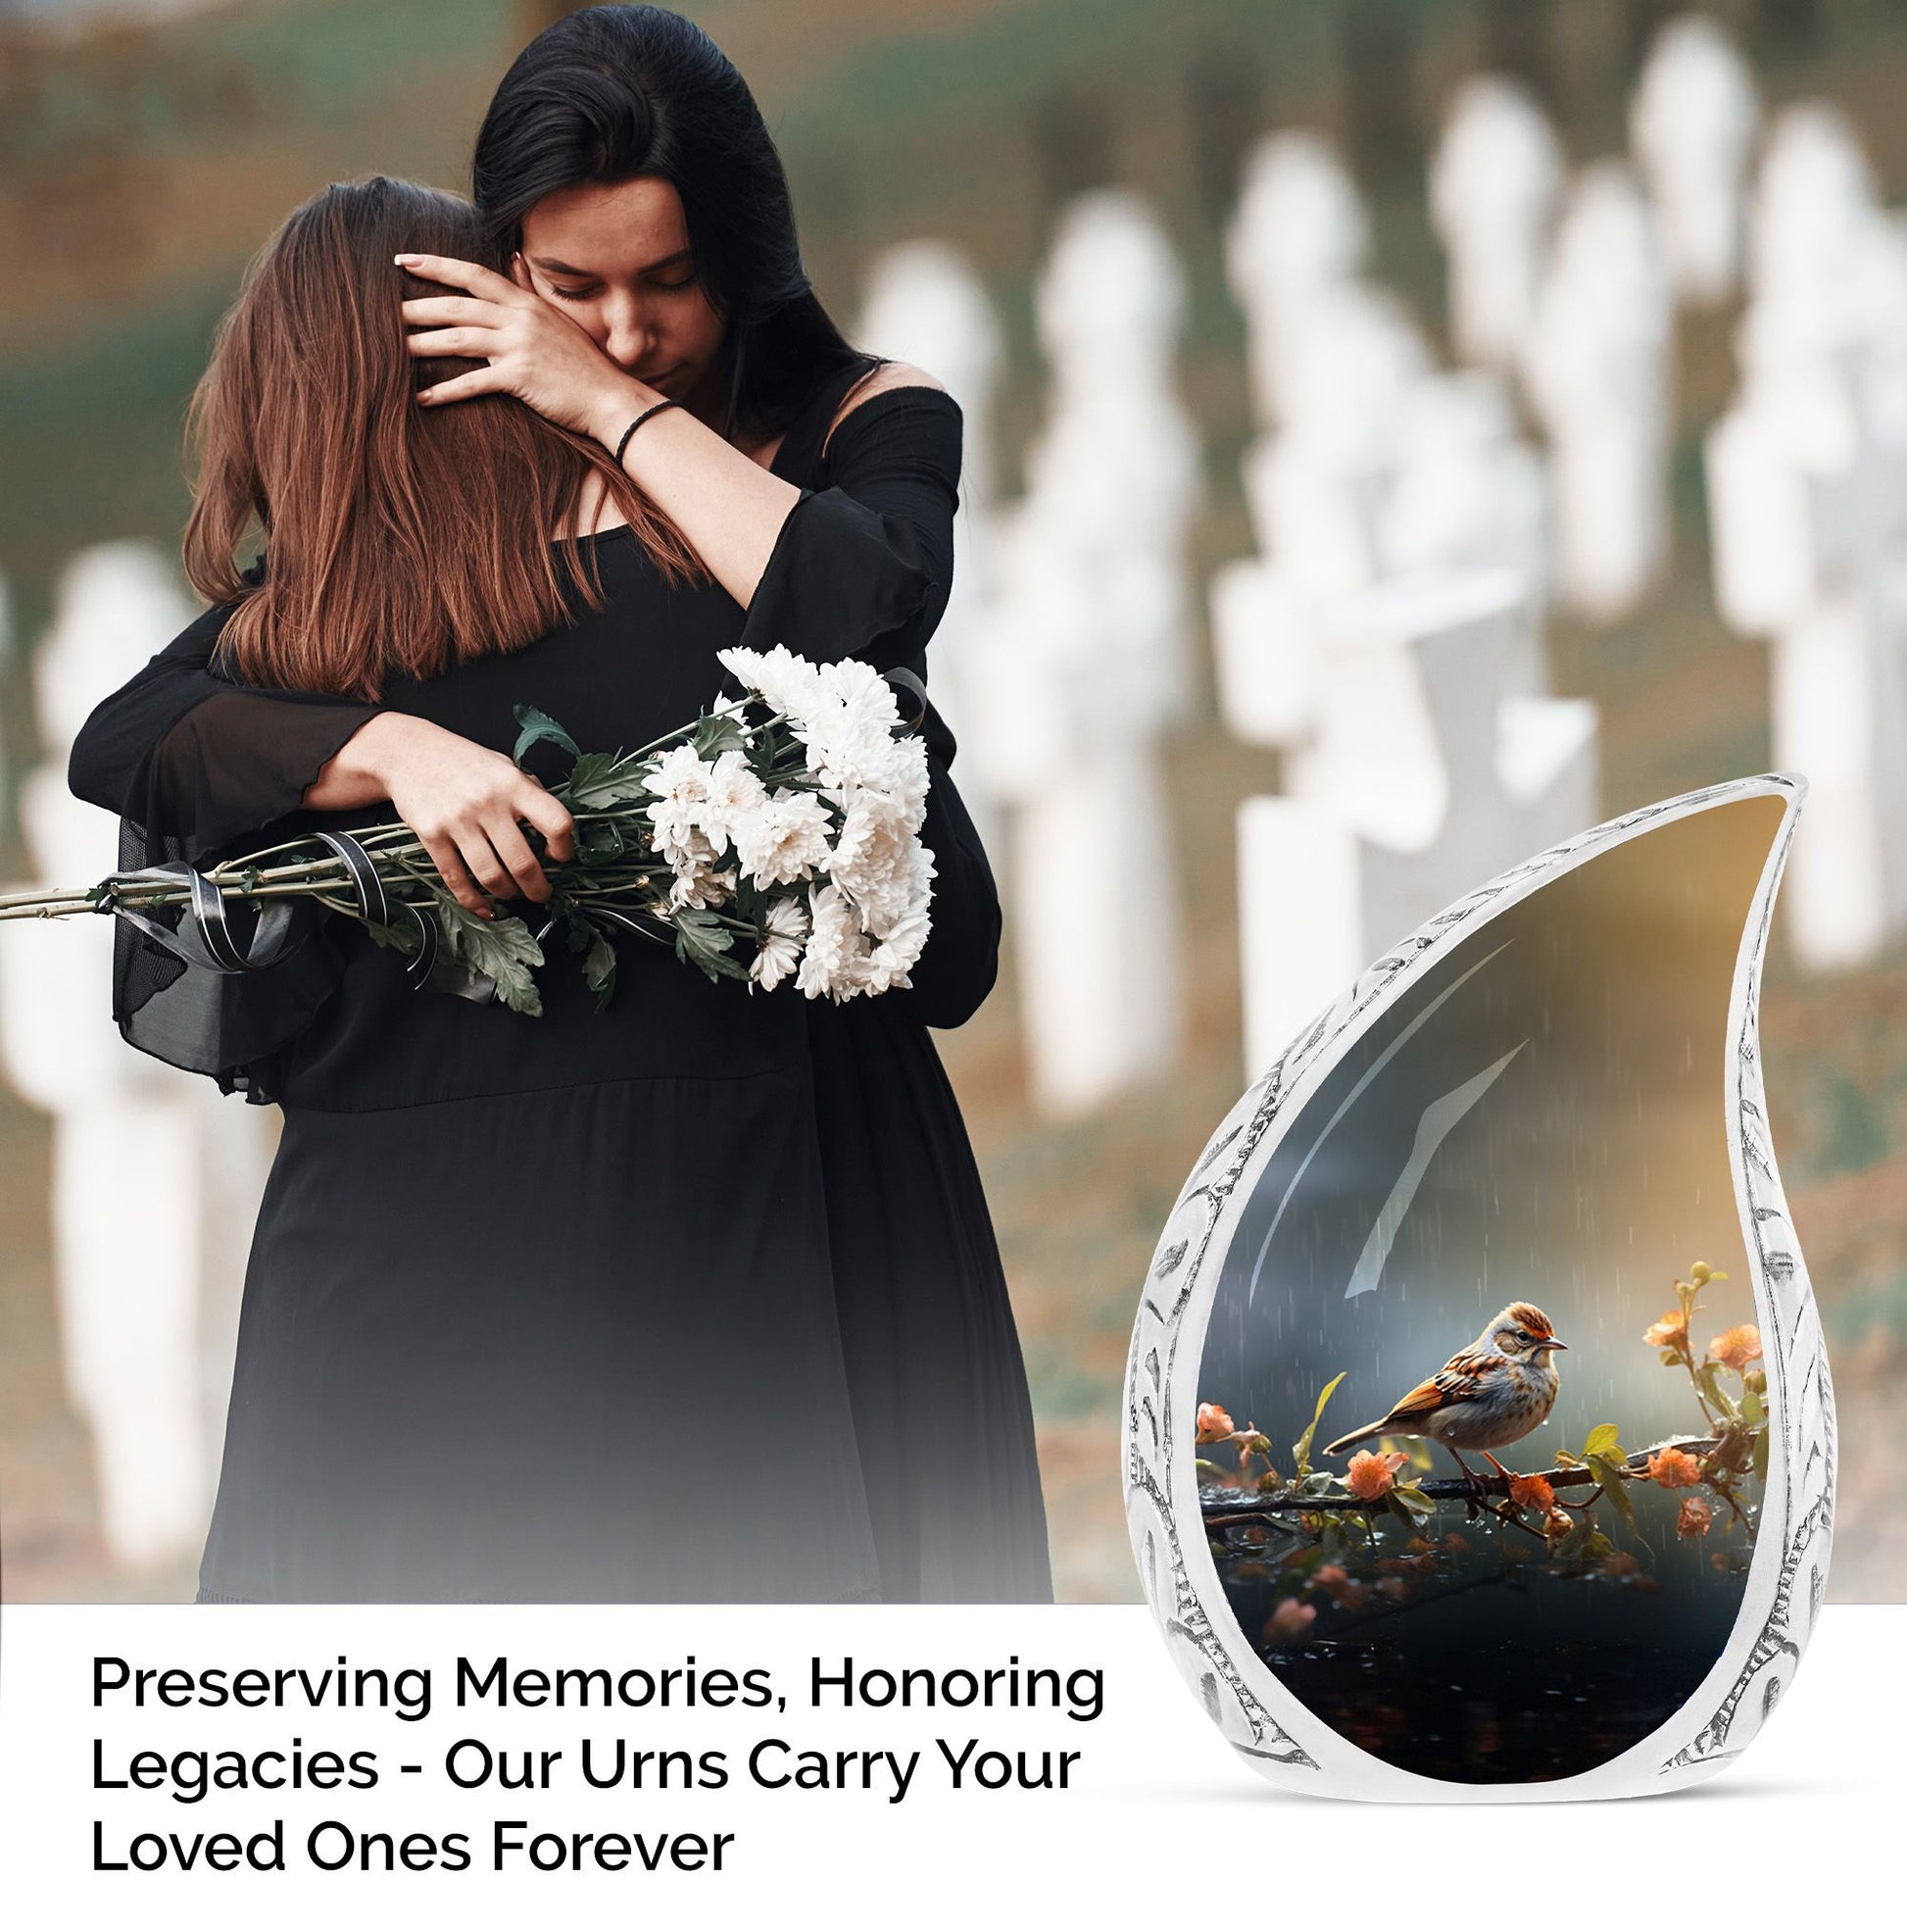 Large Cremation Urn for Adult Human Ashes featuring a Red Sparrow and Yellow Flowers, Unique Burial Urn